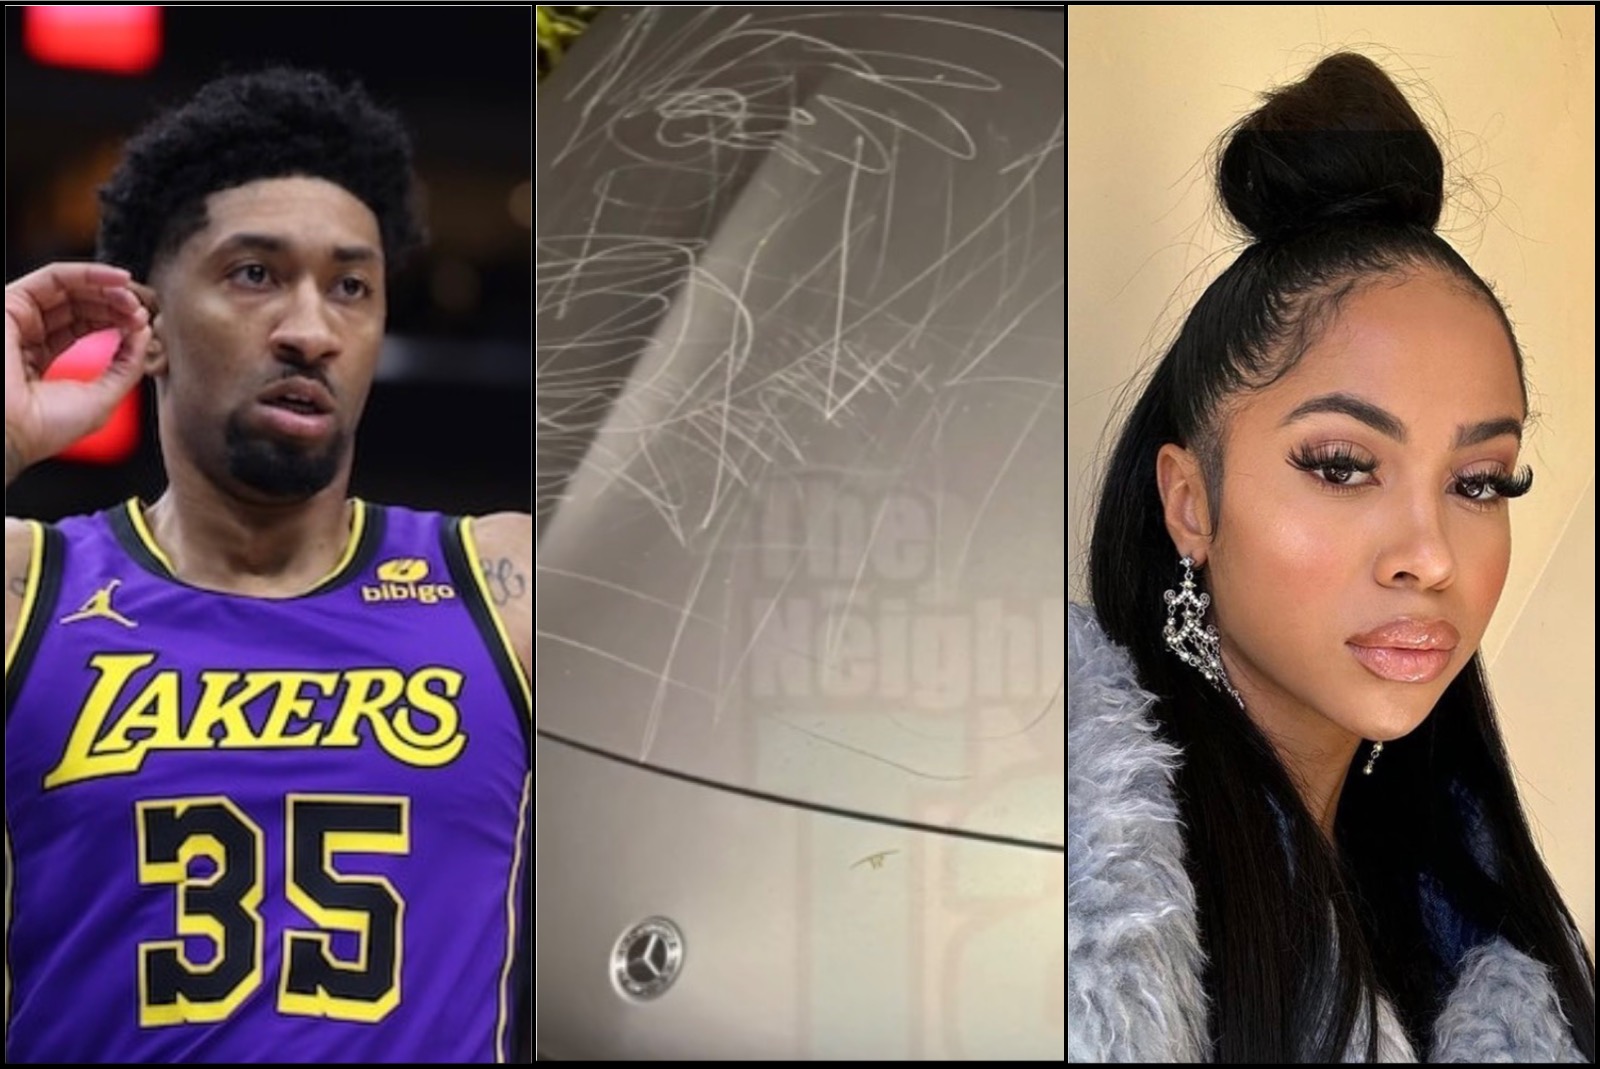 Lakers’ Christian Wood Granted Temporary Restraining Order Against His Dramatic Ex-girlfriend Yasmine Lopez After Accusing Her Of Vandalising His Car